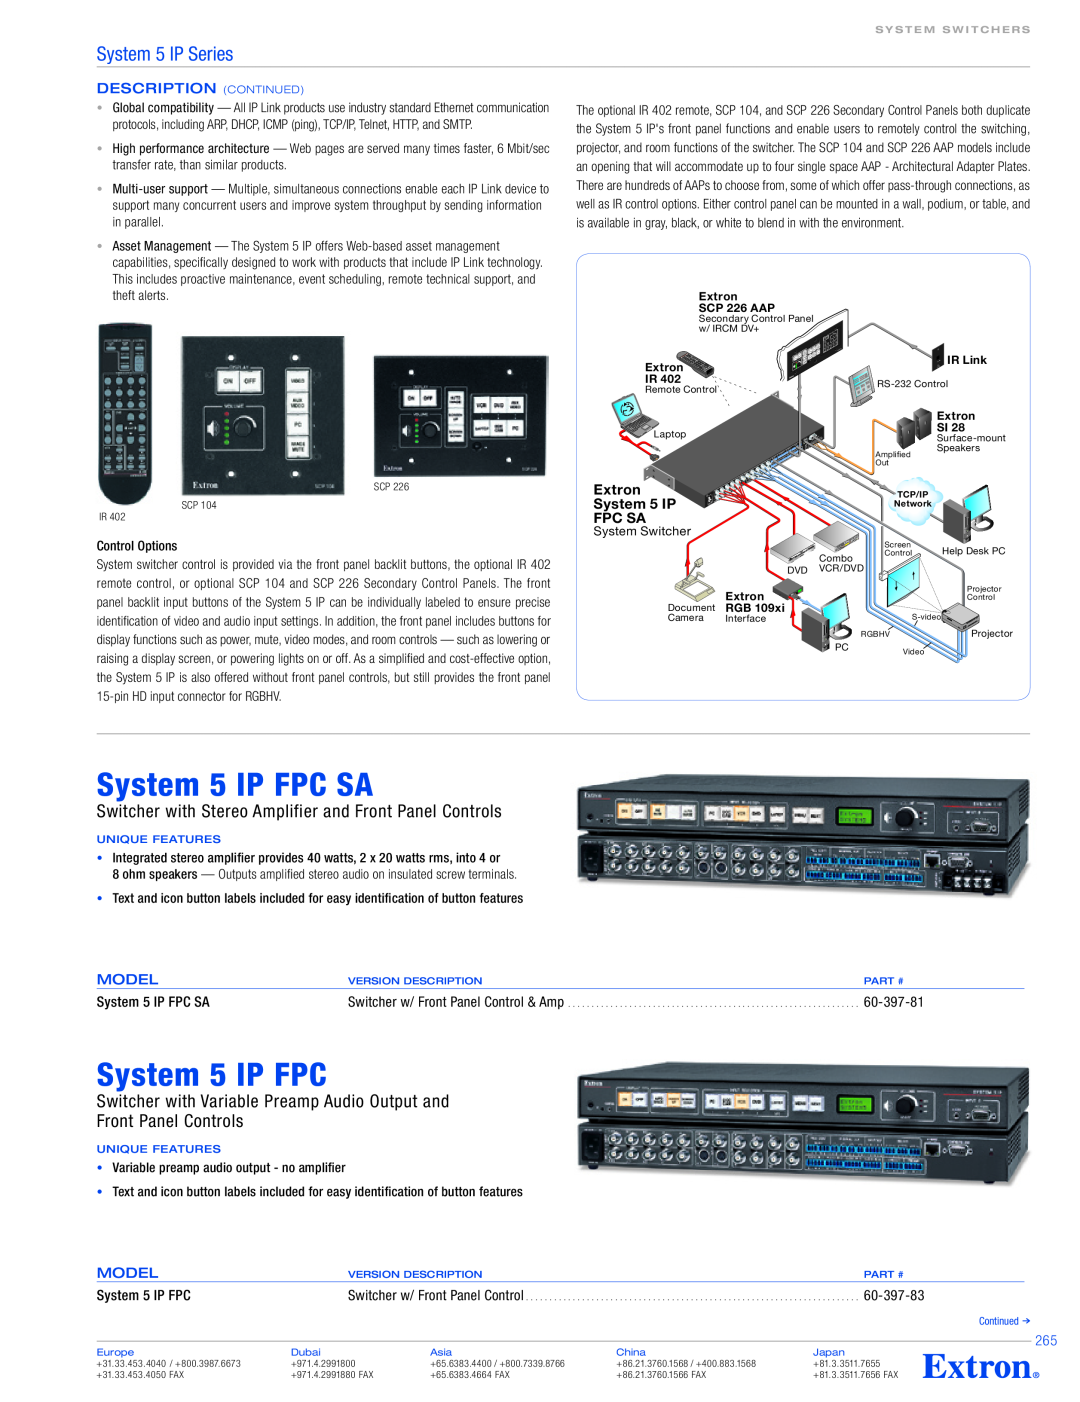 Extron electronic System 5 IP Series System 5 IP FPC SA, Switcher with Stereo Amplifier and Front Panel Controls, Model 